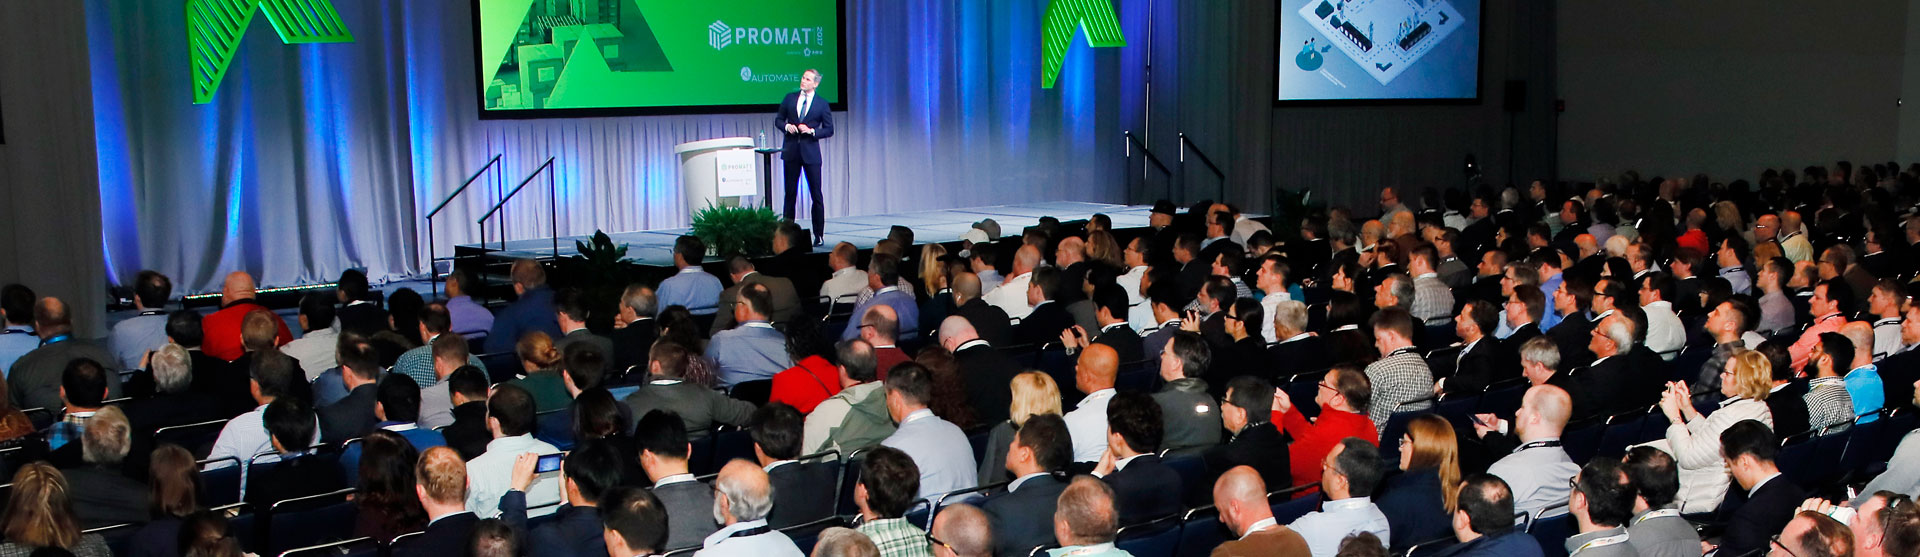 What’s so great about ProMat?